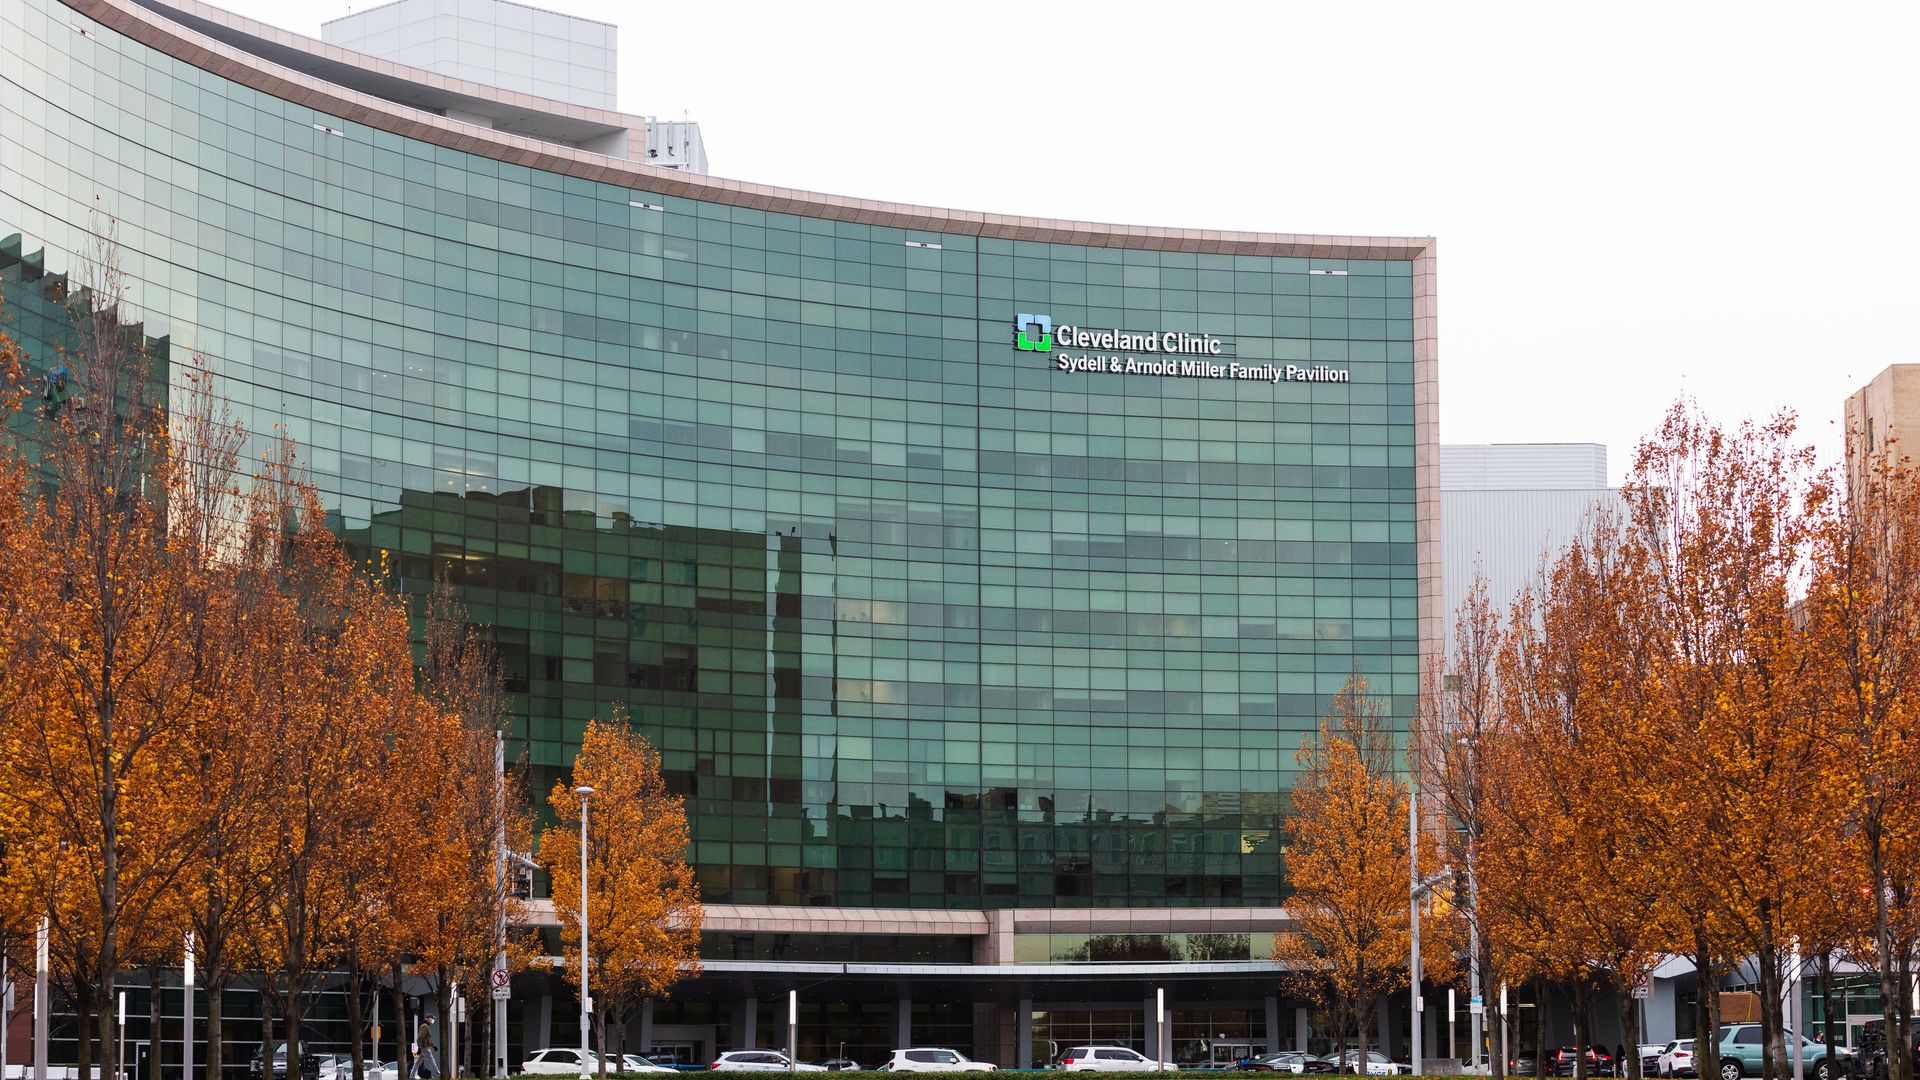 The green Cleveland Clinic hospital building with fall trees nearby.